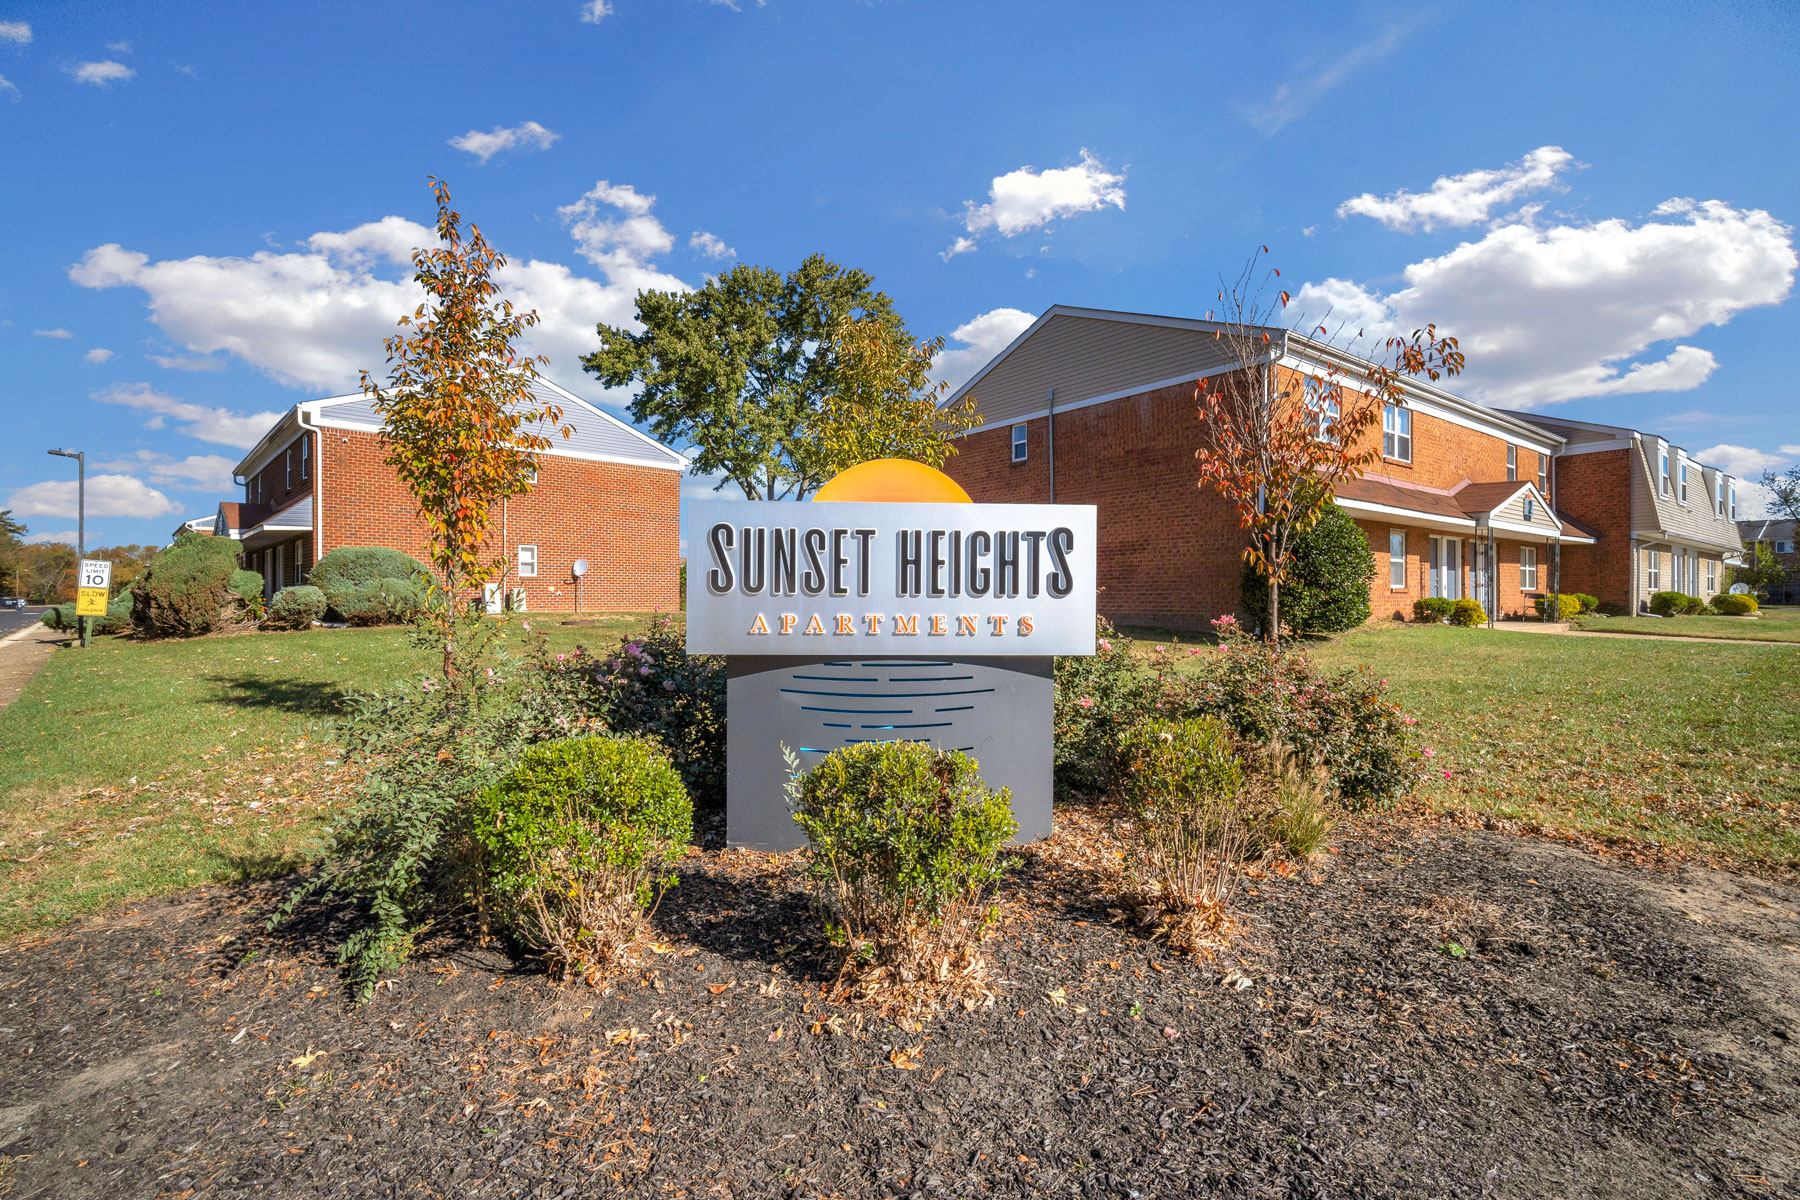 Sunset Heights Apartments